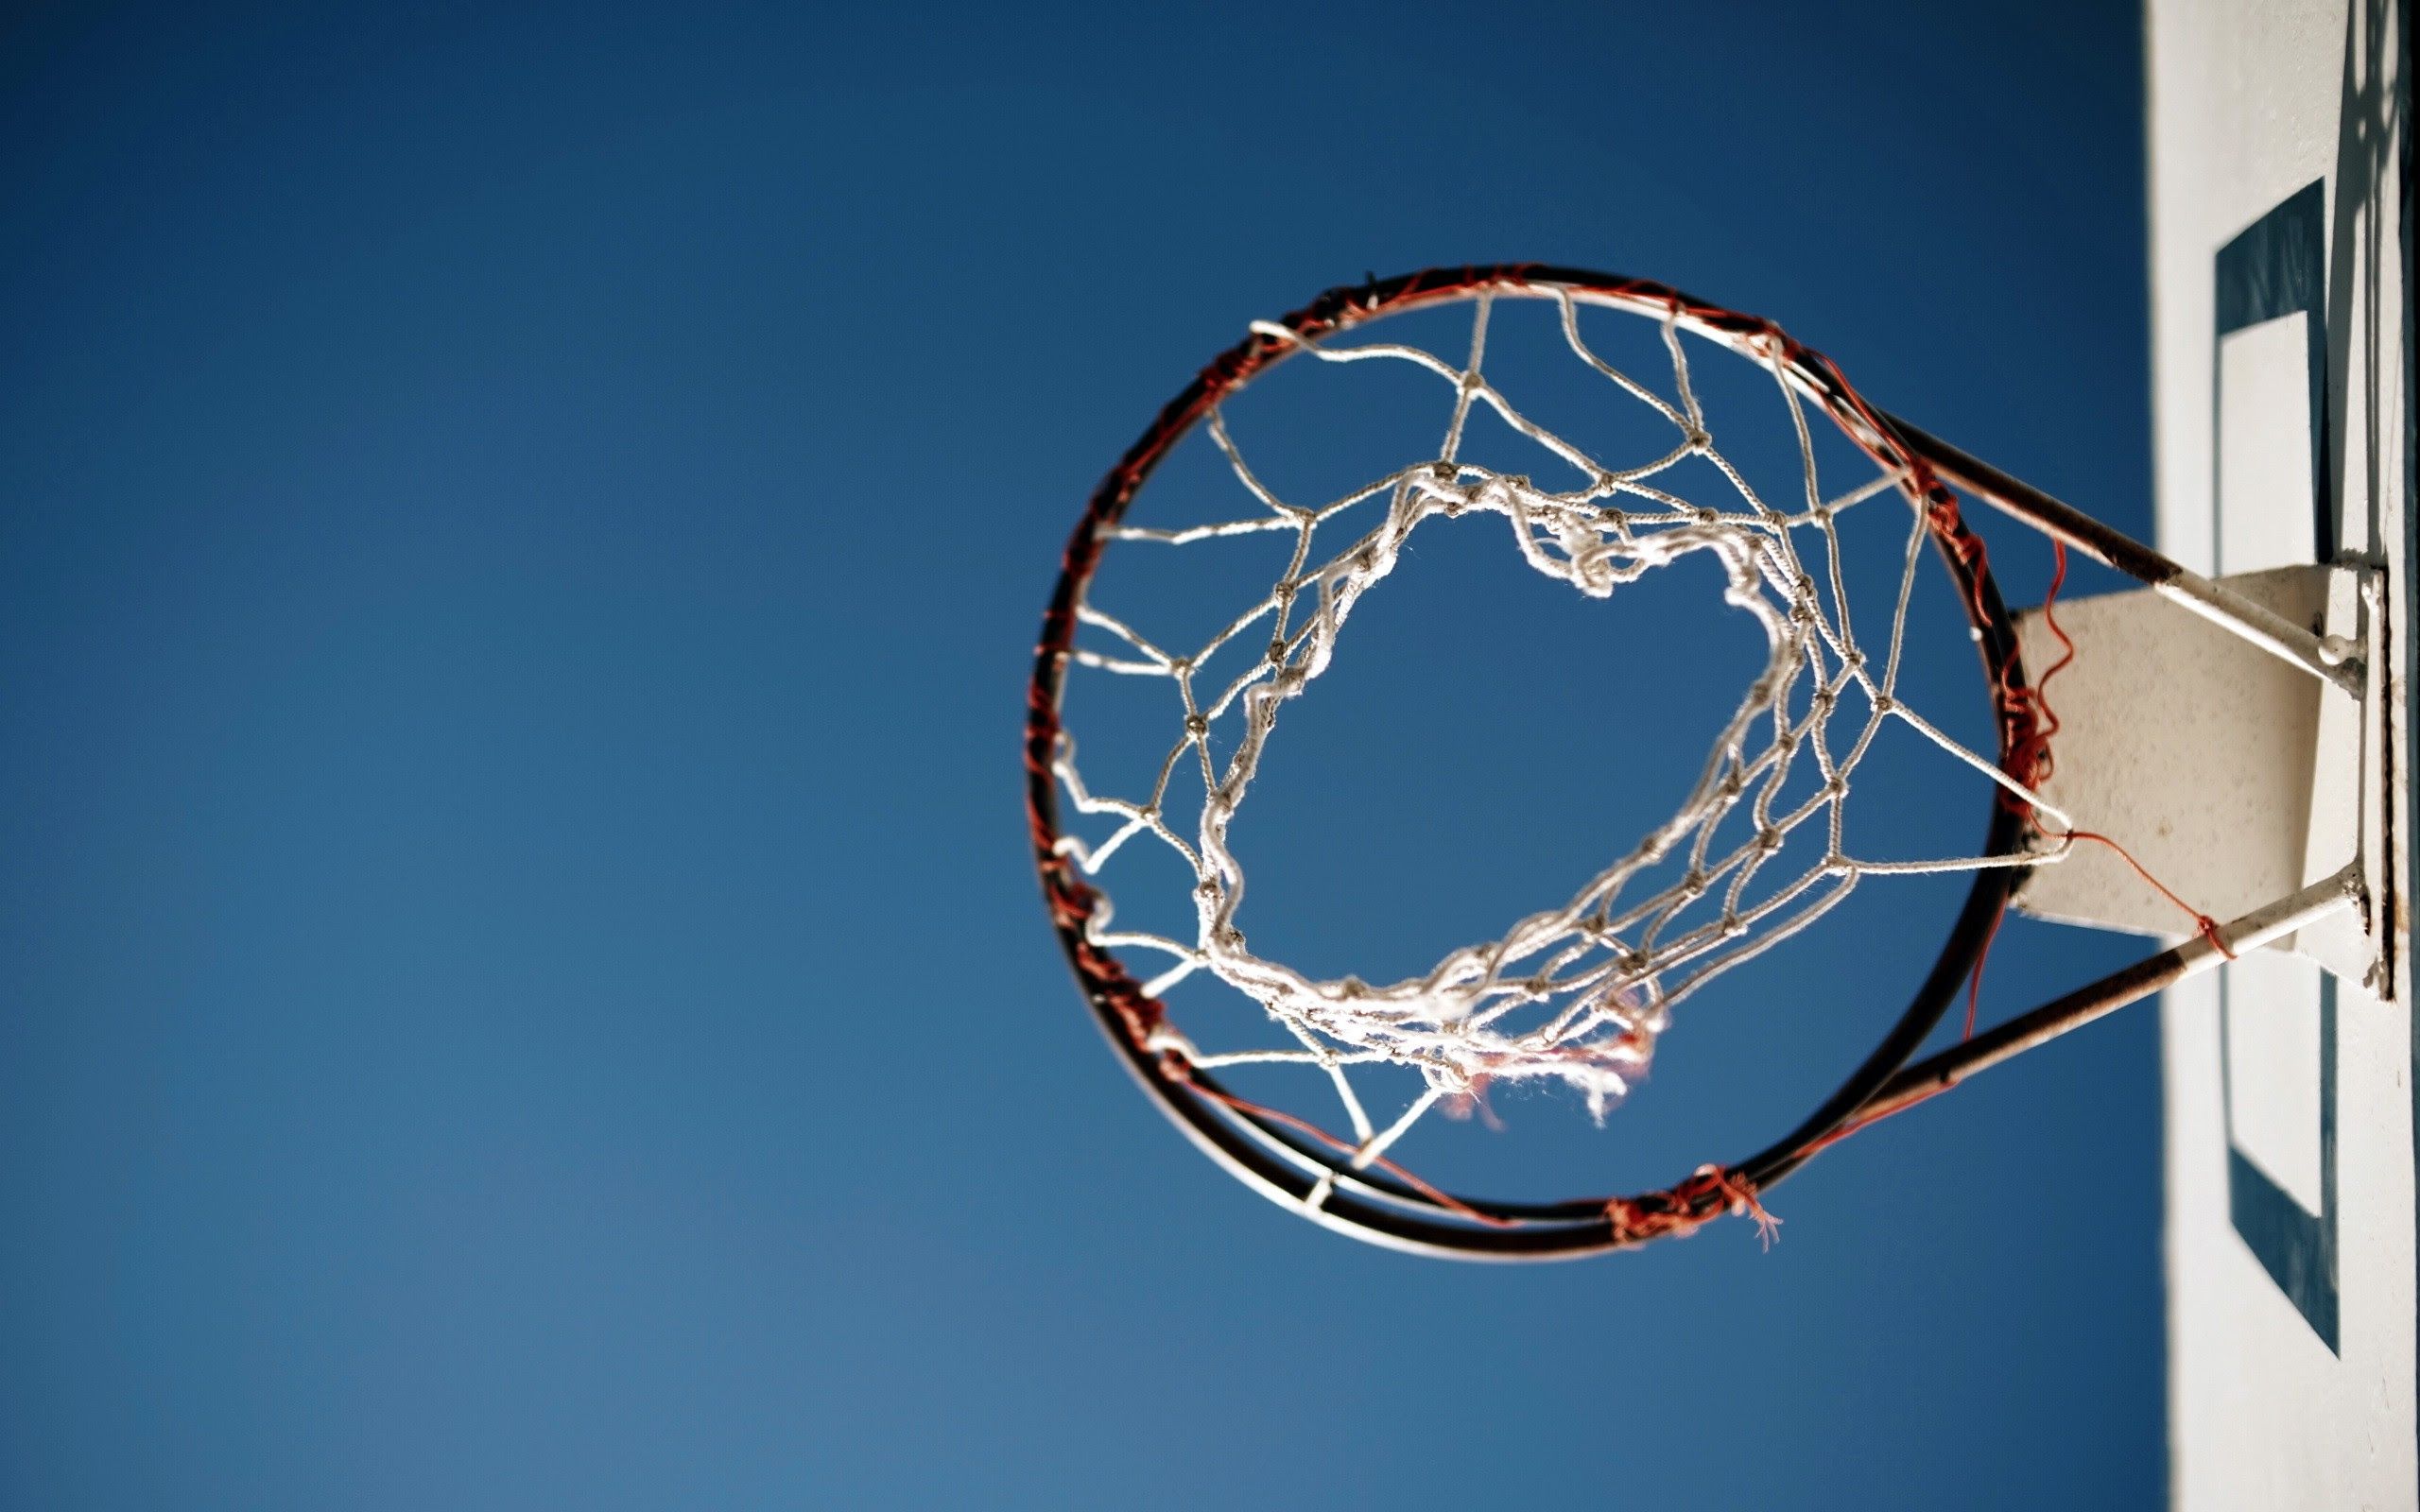 Basketball Ring, HD Sports, 4k Wallpapers, Images ...